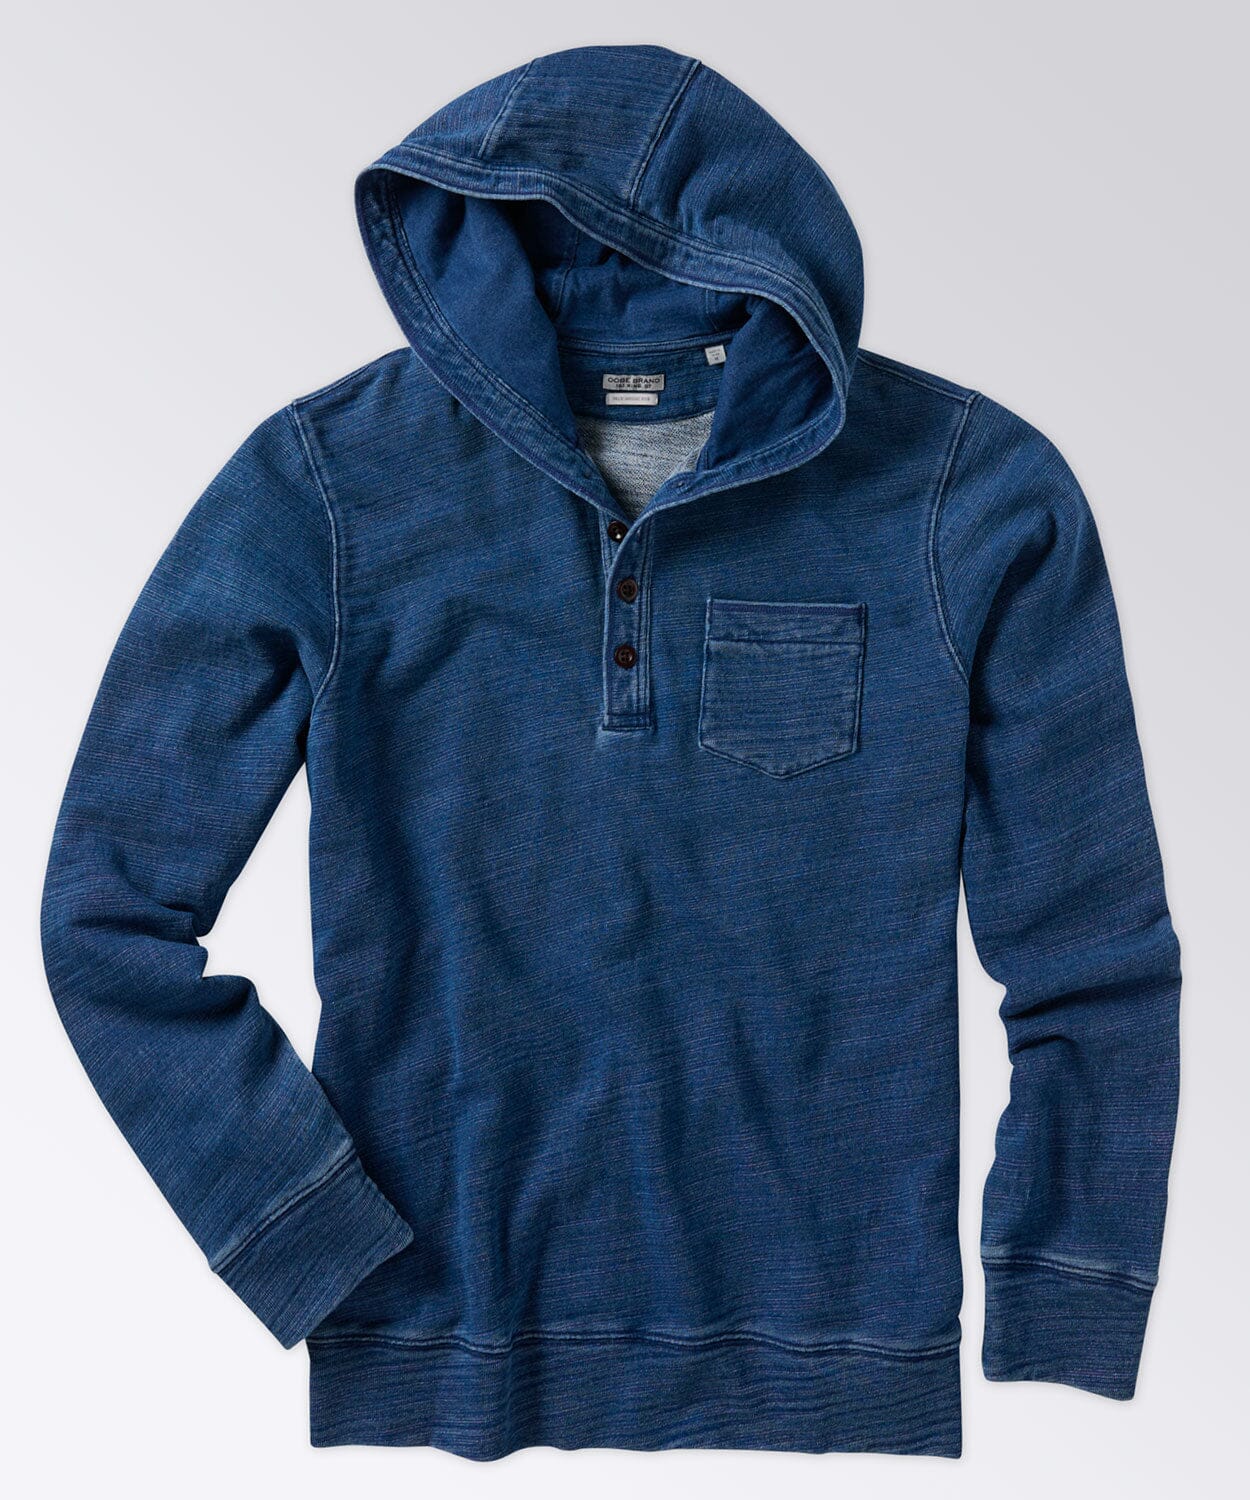 Indigo Hoodie with Button Placket and Chest Pocket